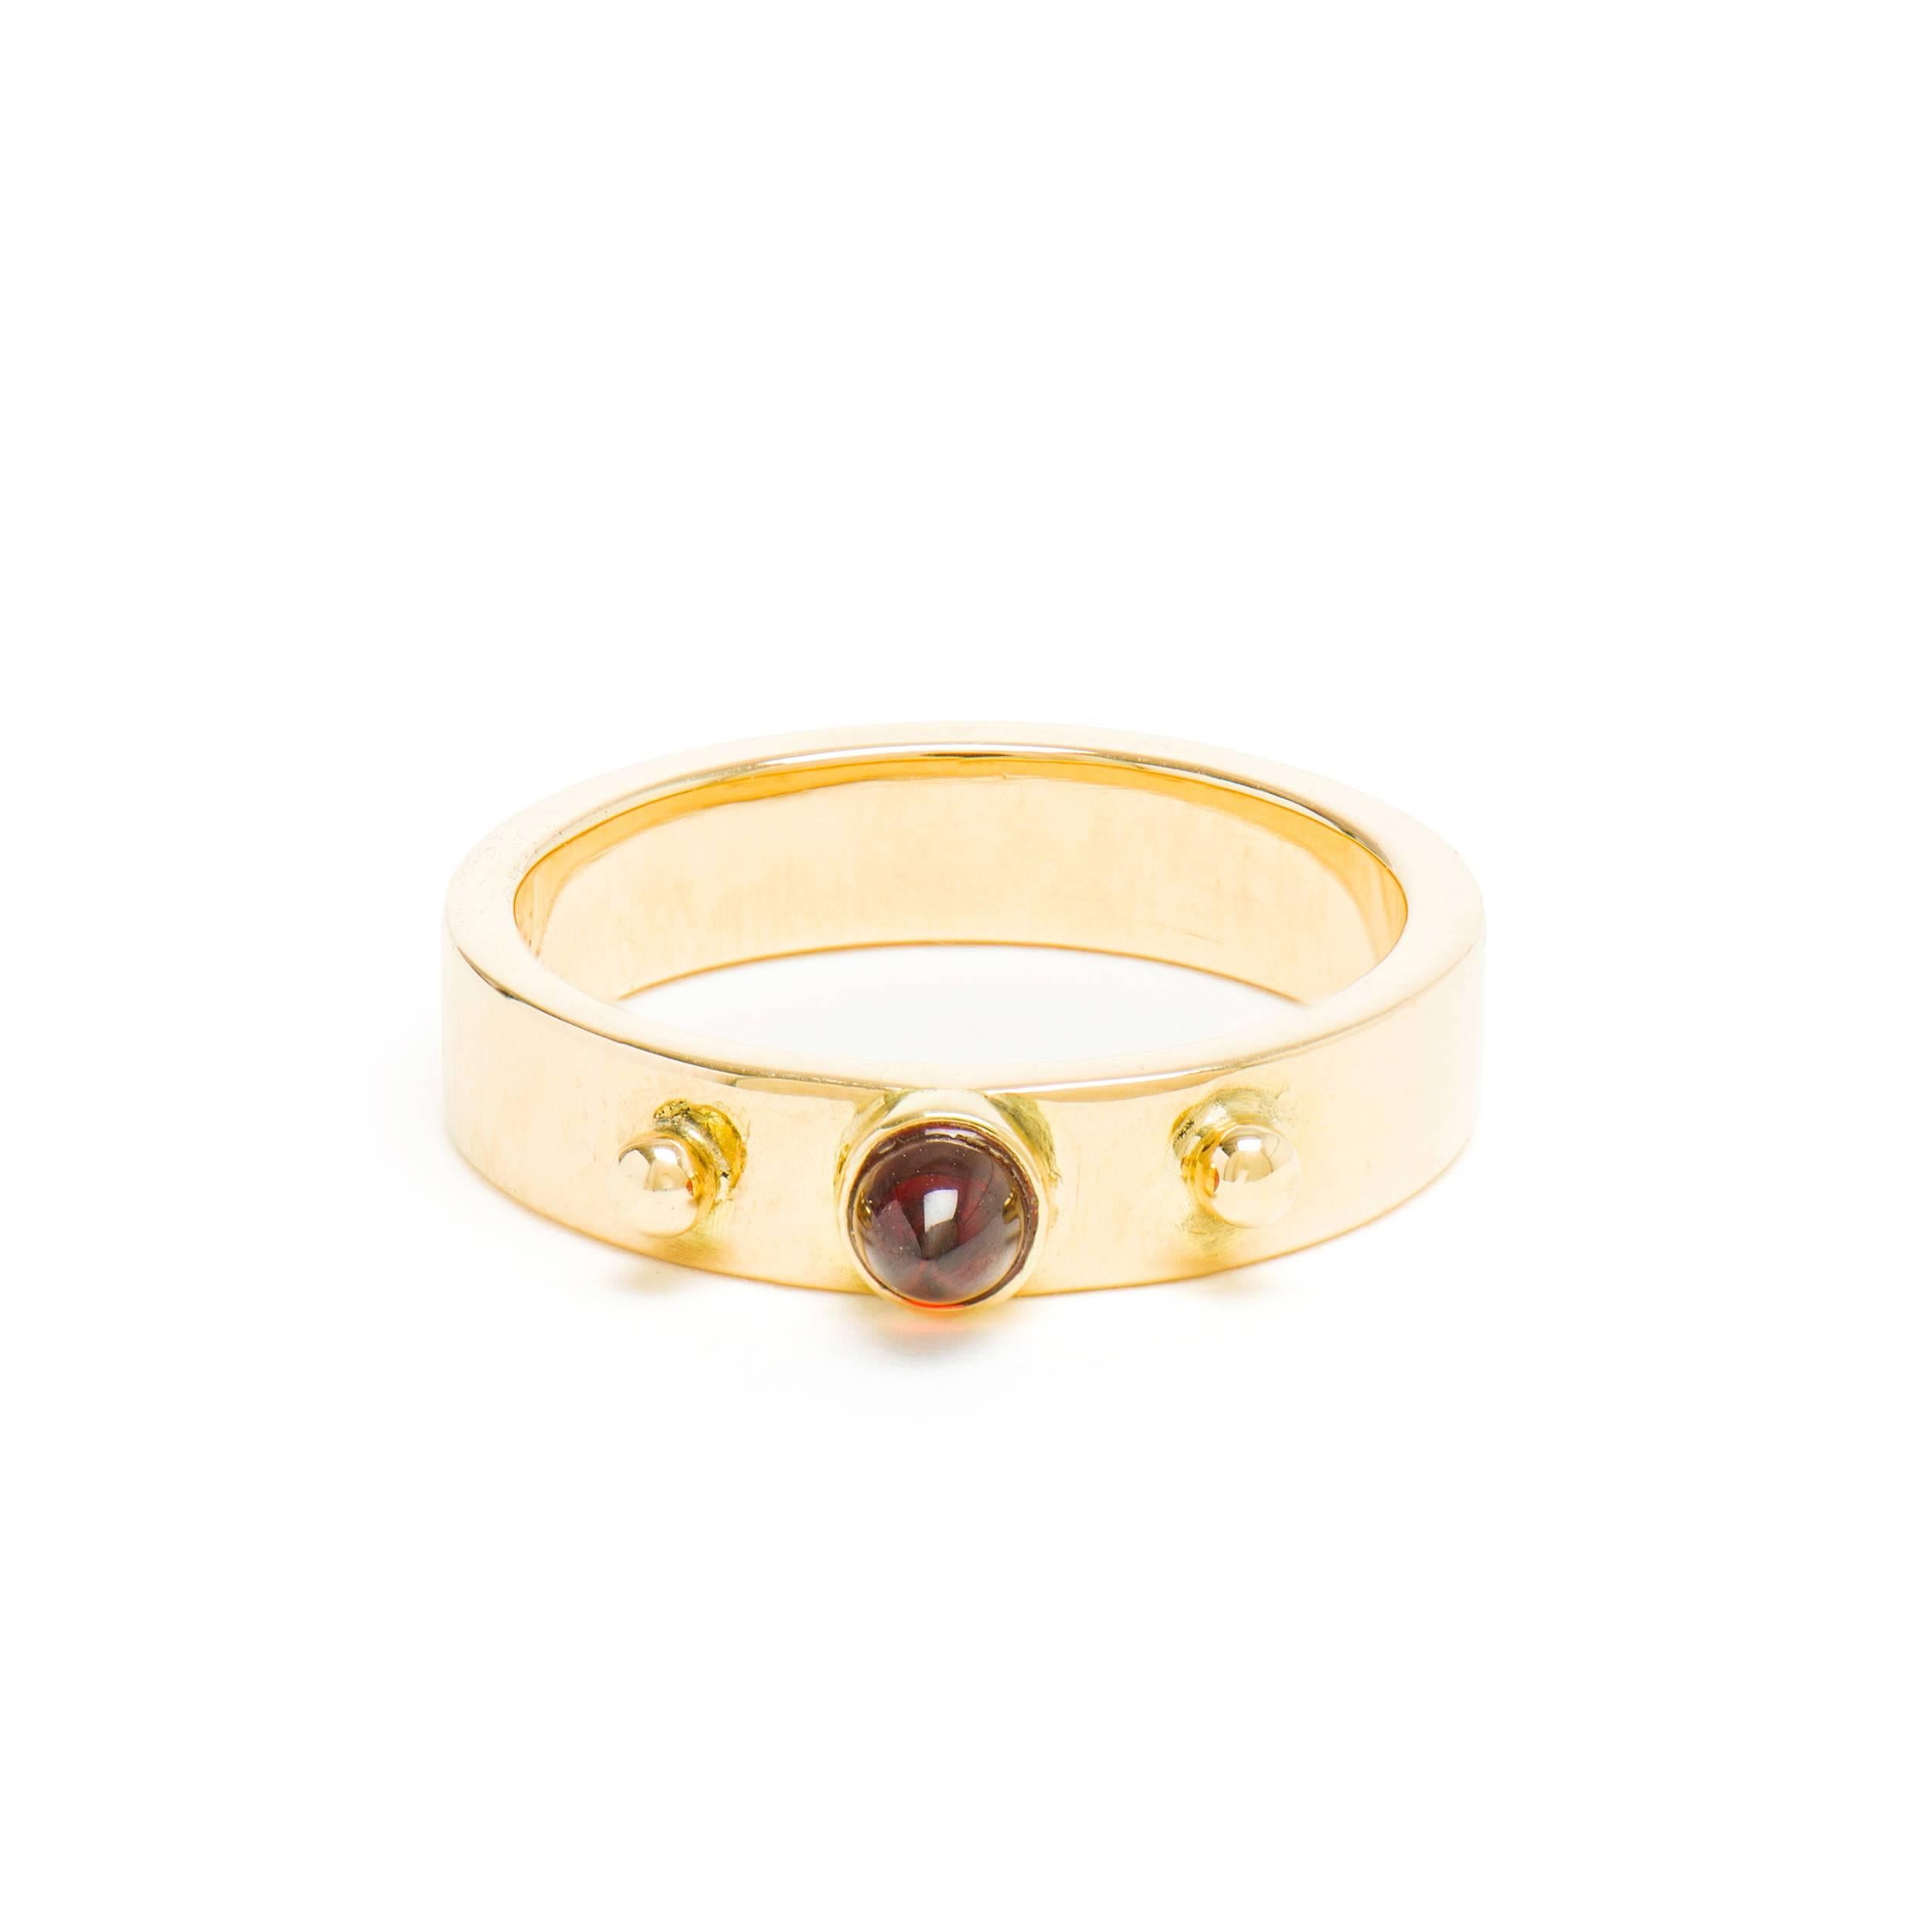 This DUBINI ring from the 'Empires' collection features our signature bullet cabochons set in 18K yellow gold.

Available: Size EU 48, EU 49

The ring may be ordered in any size with a lead time of 2-3